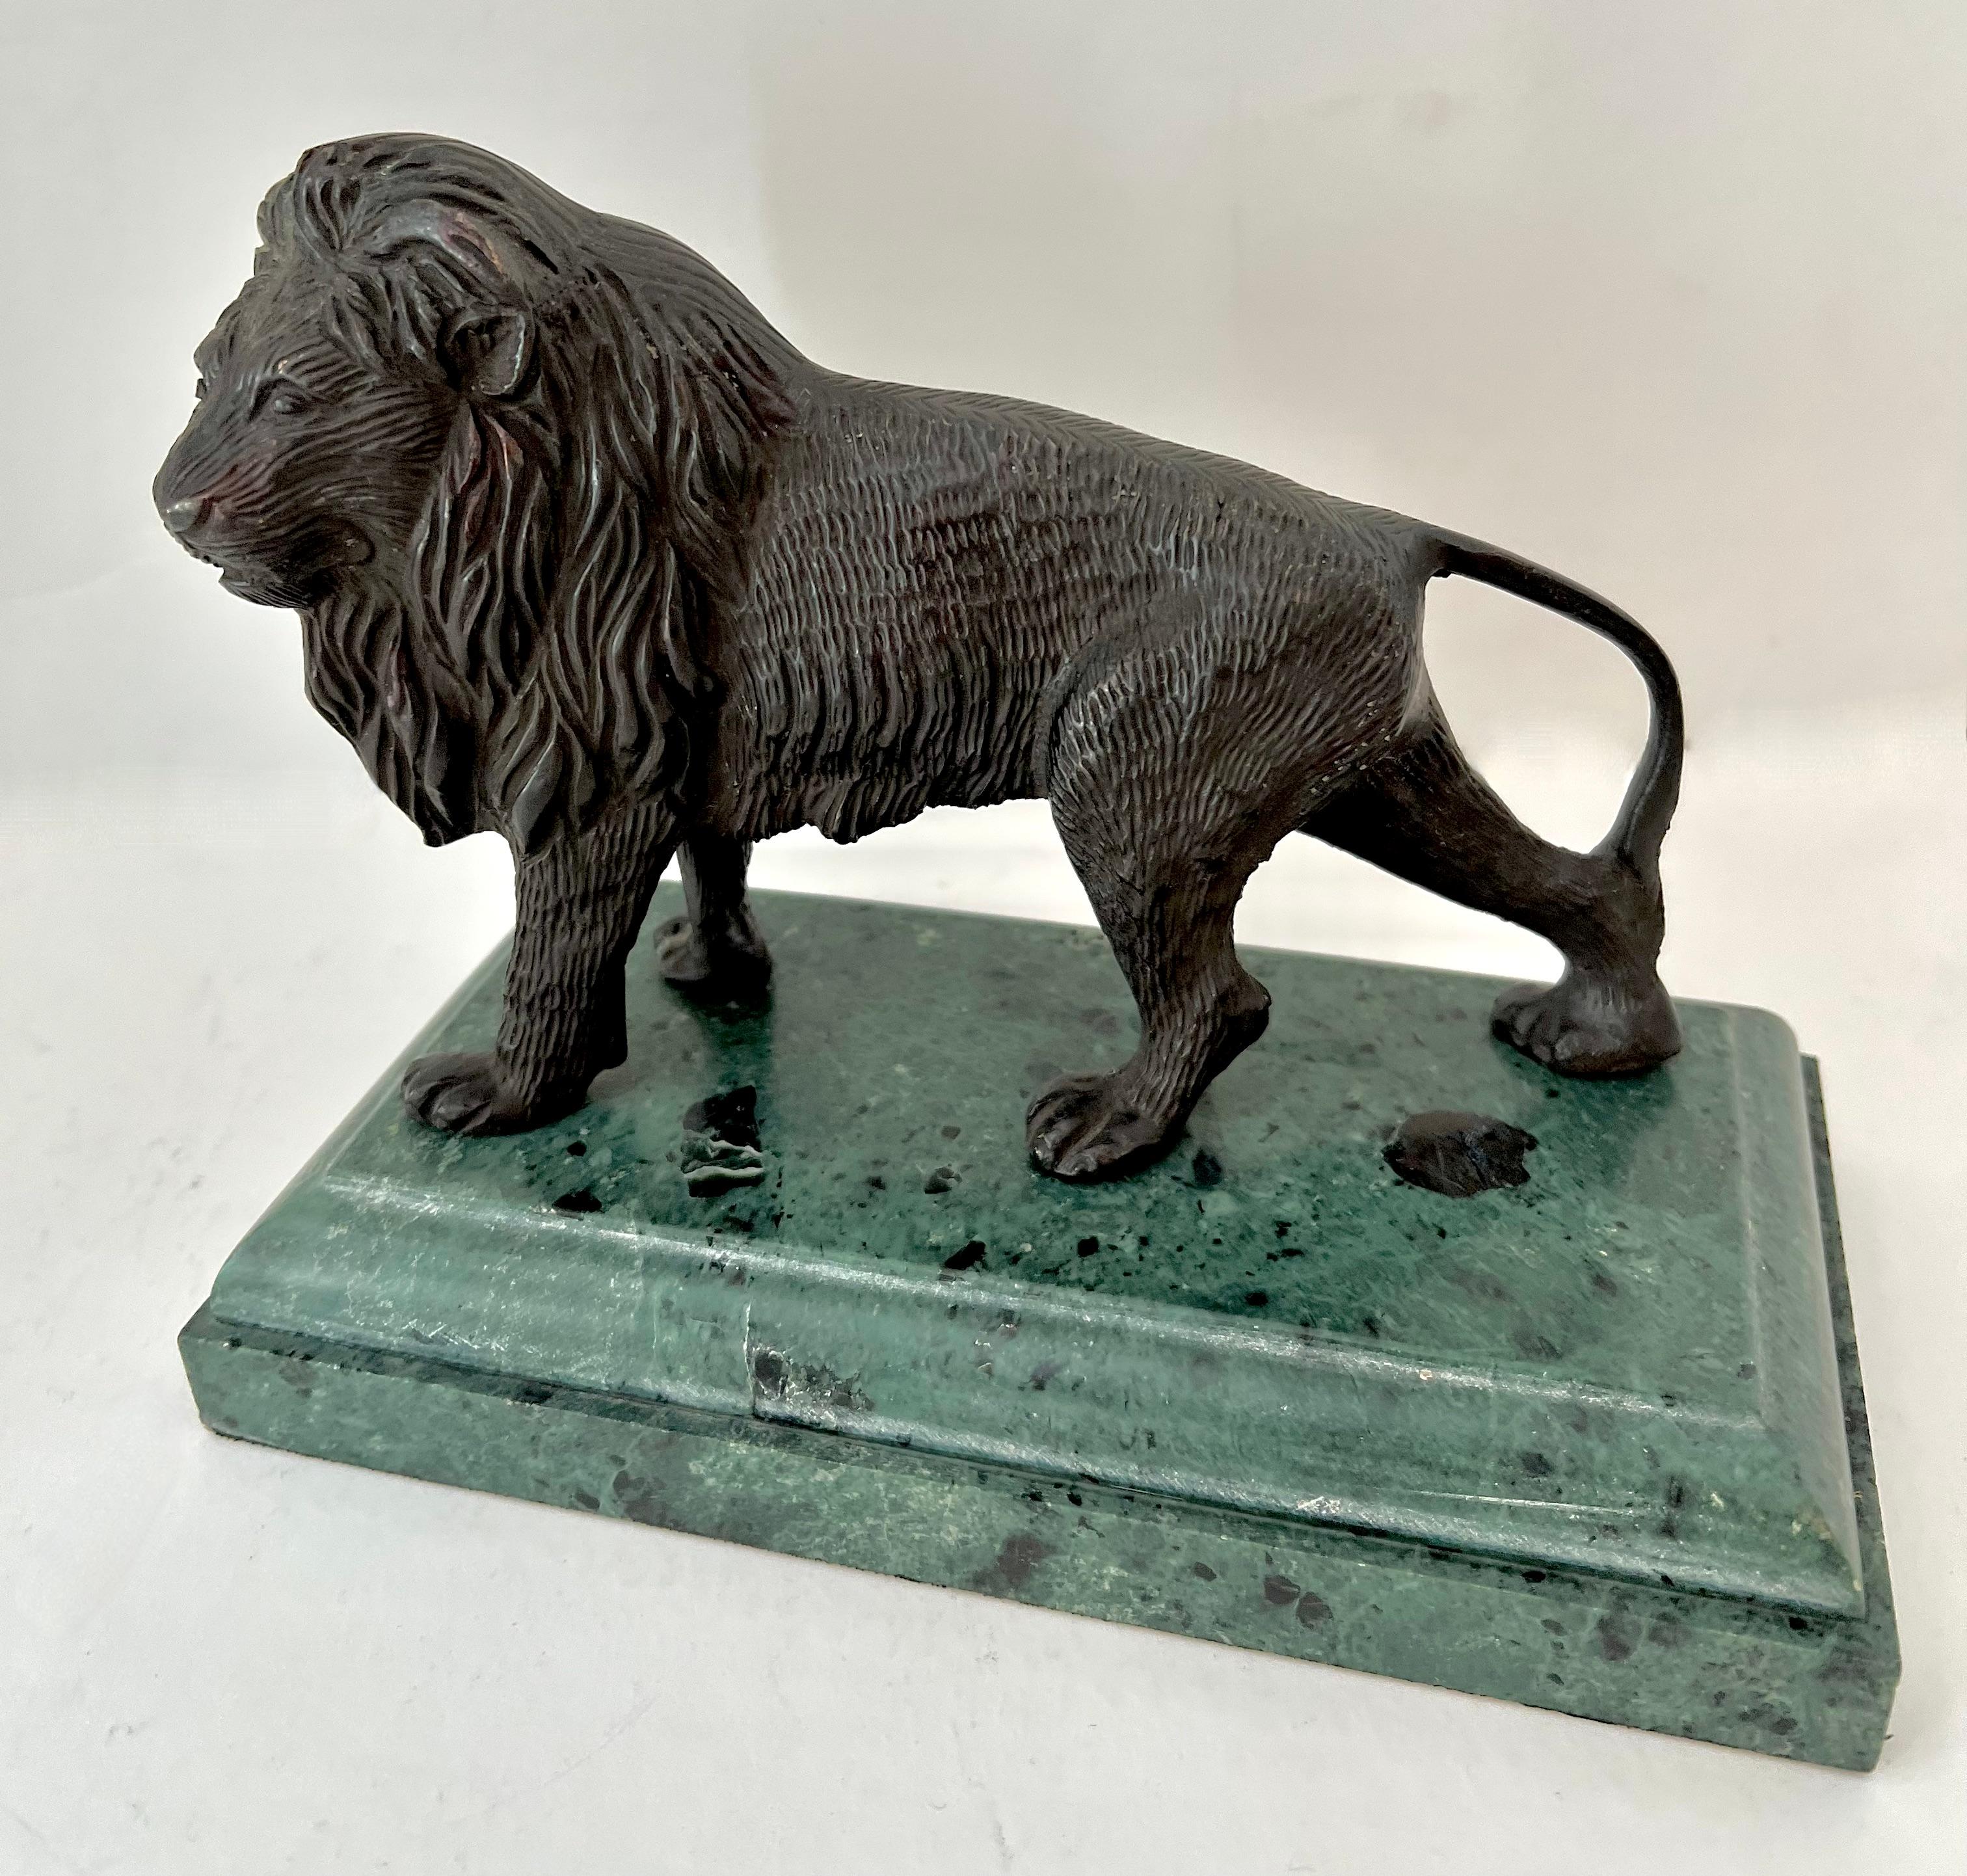 A bronze Sculpted Regal Lion on a Marble base.  This is a lovely piece that could be a stand alone decorative piece or also used as a bookend or paperweight.